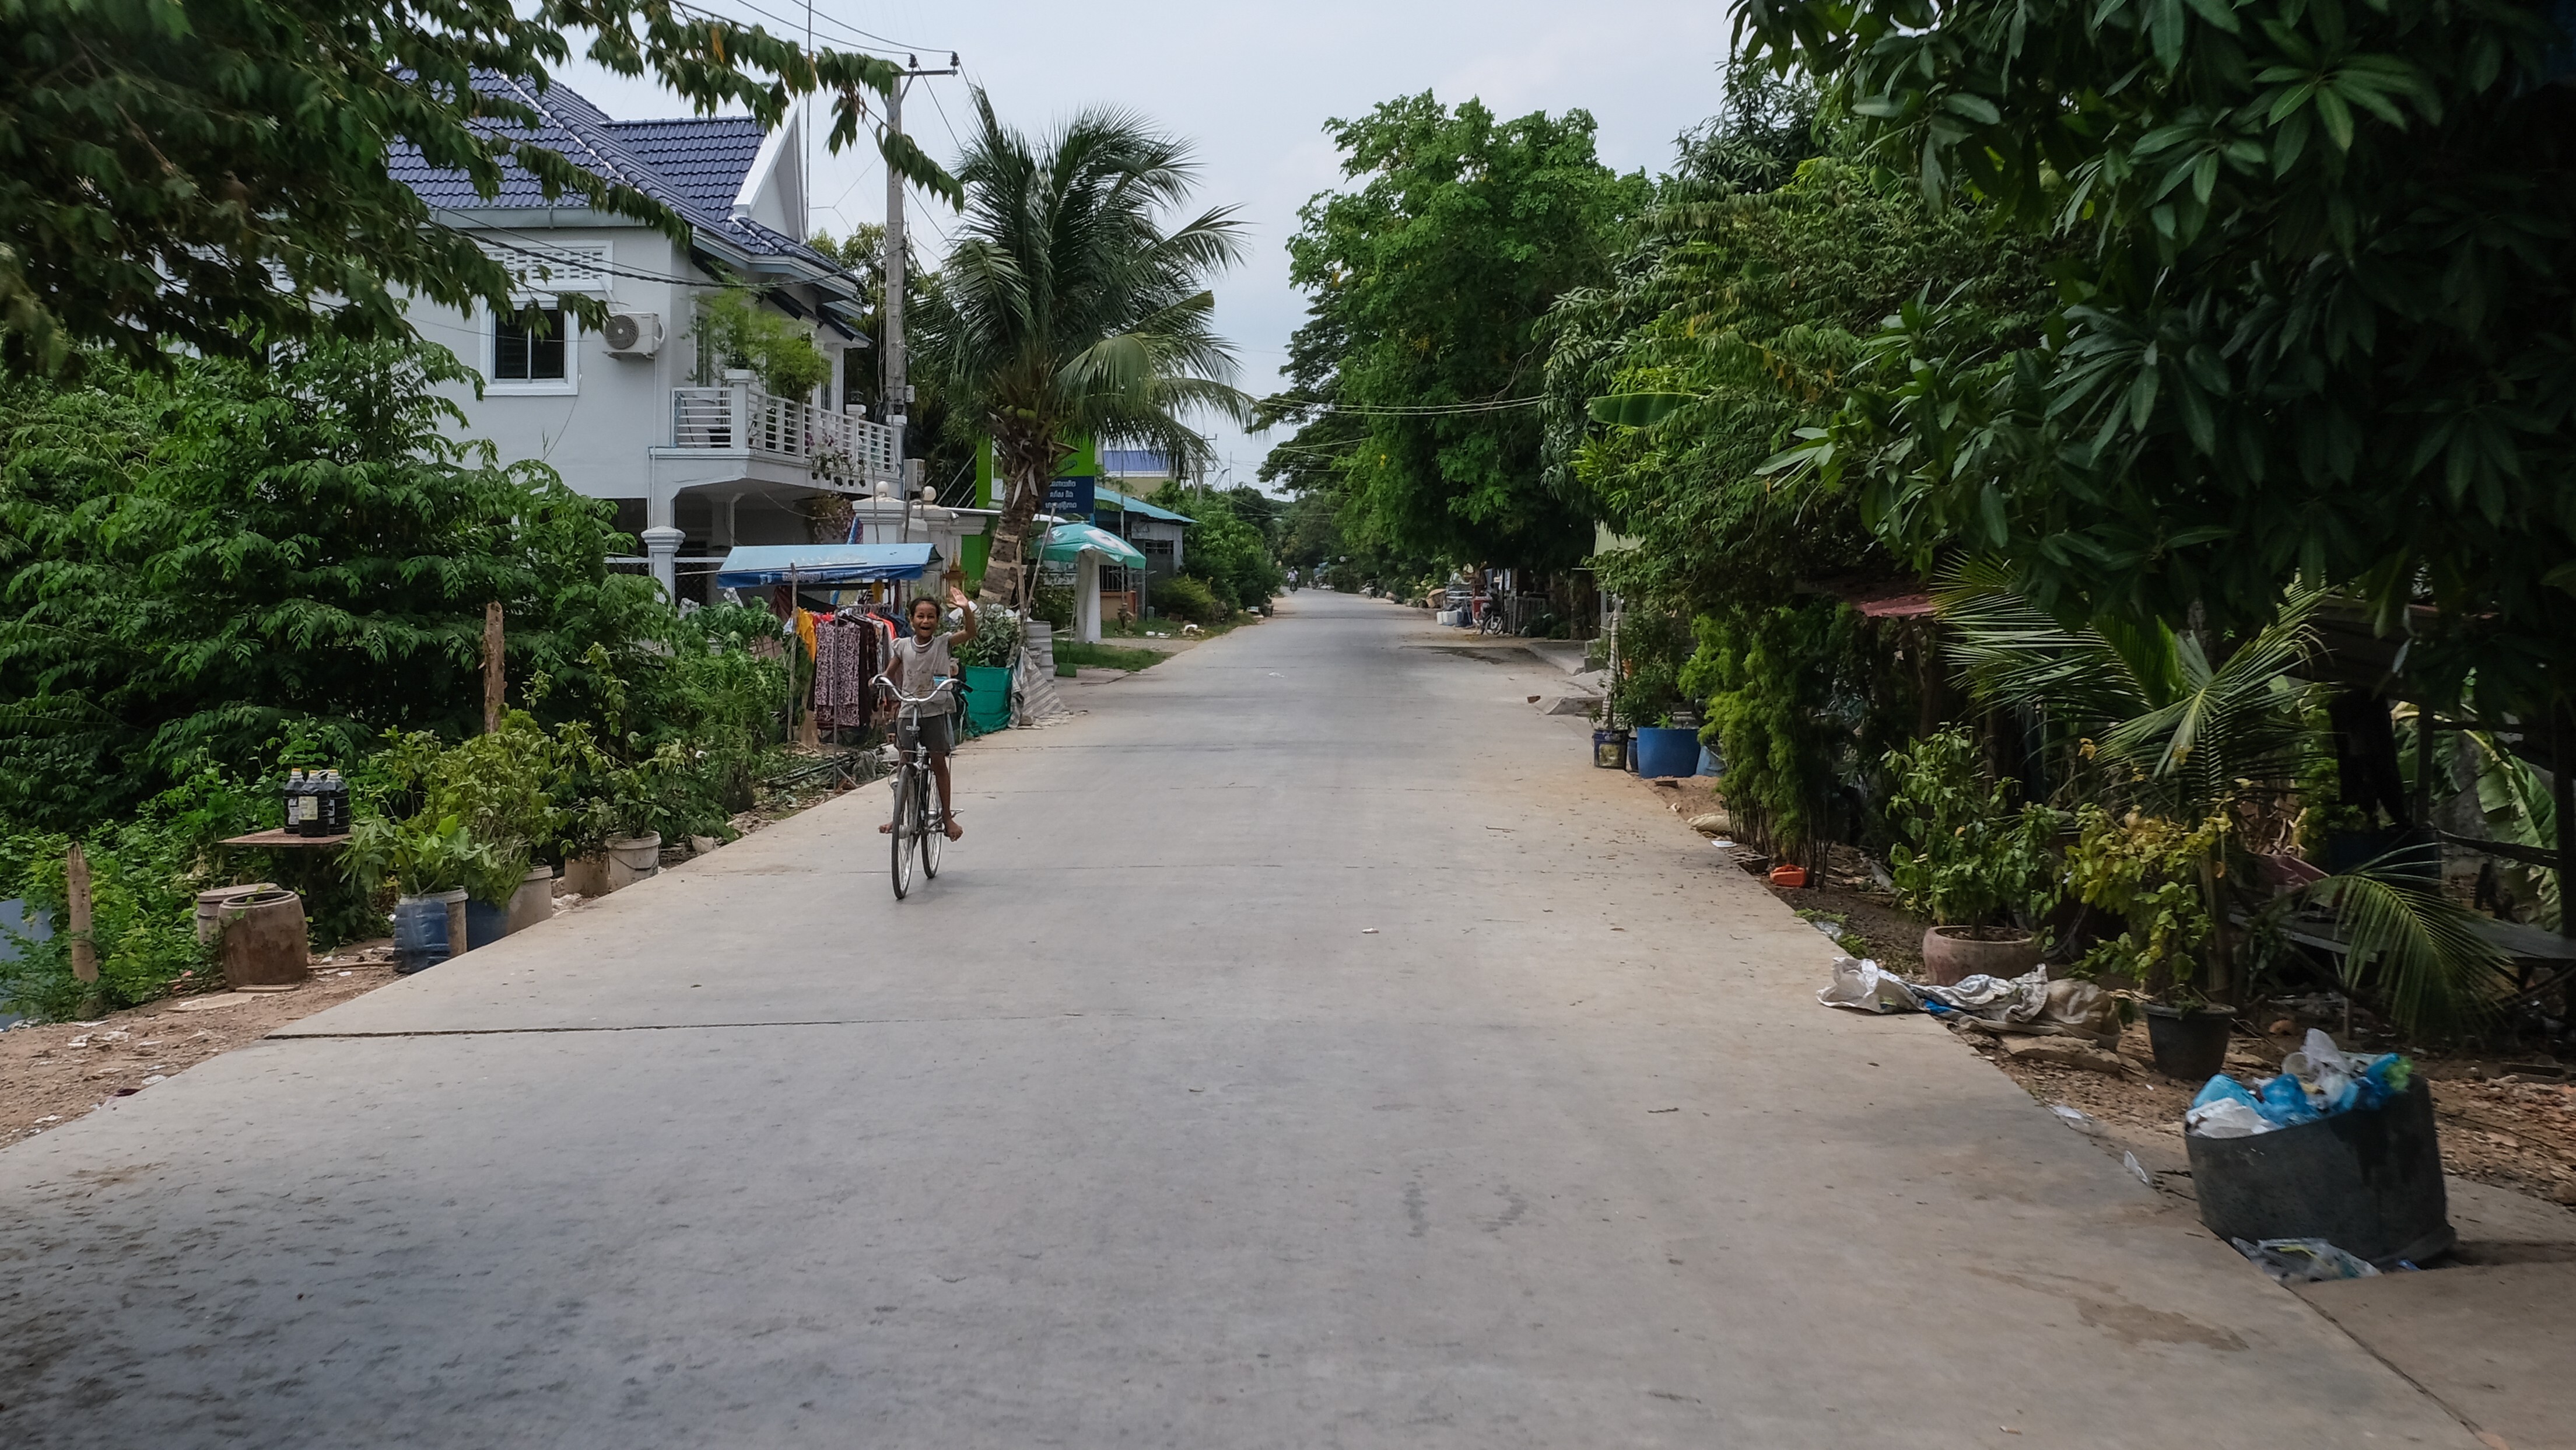 Cycling through modest tree-shaded villages feels far away from the bustle of the nearby city, Phnom Penh Photo: Pete Ford [FEATURES 2020]